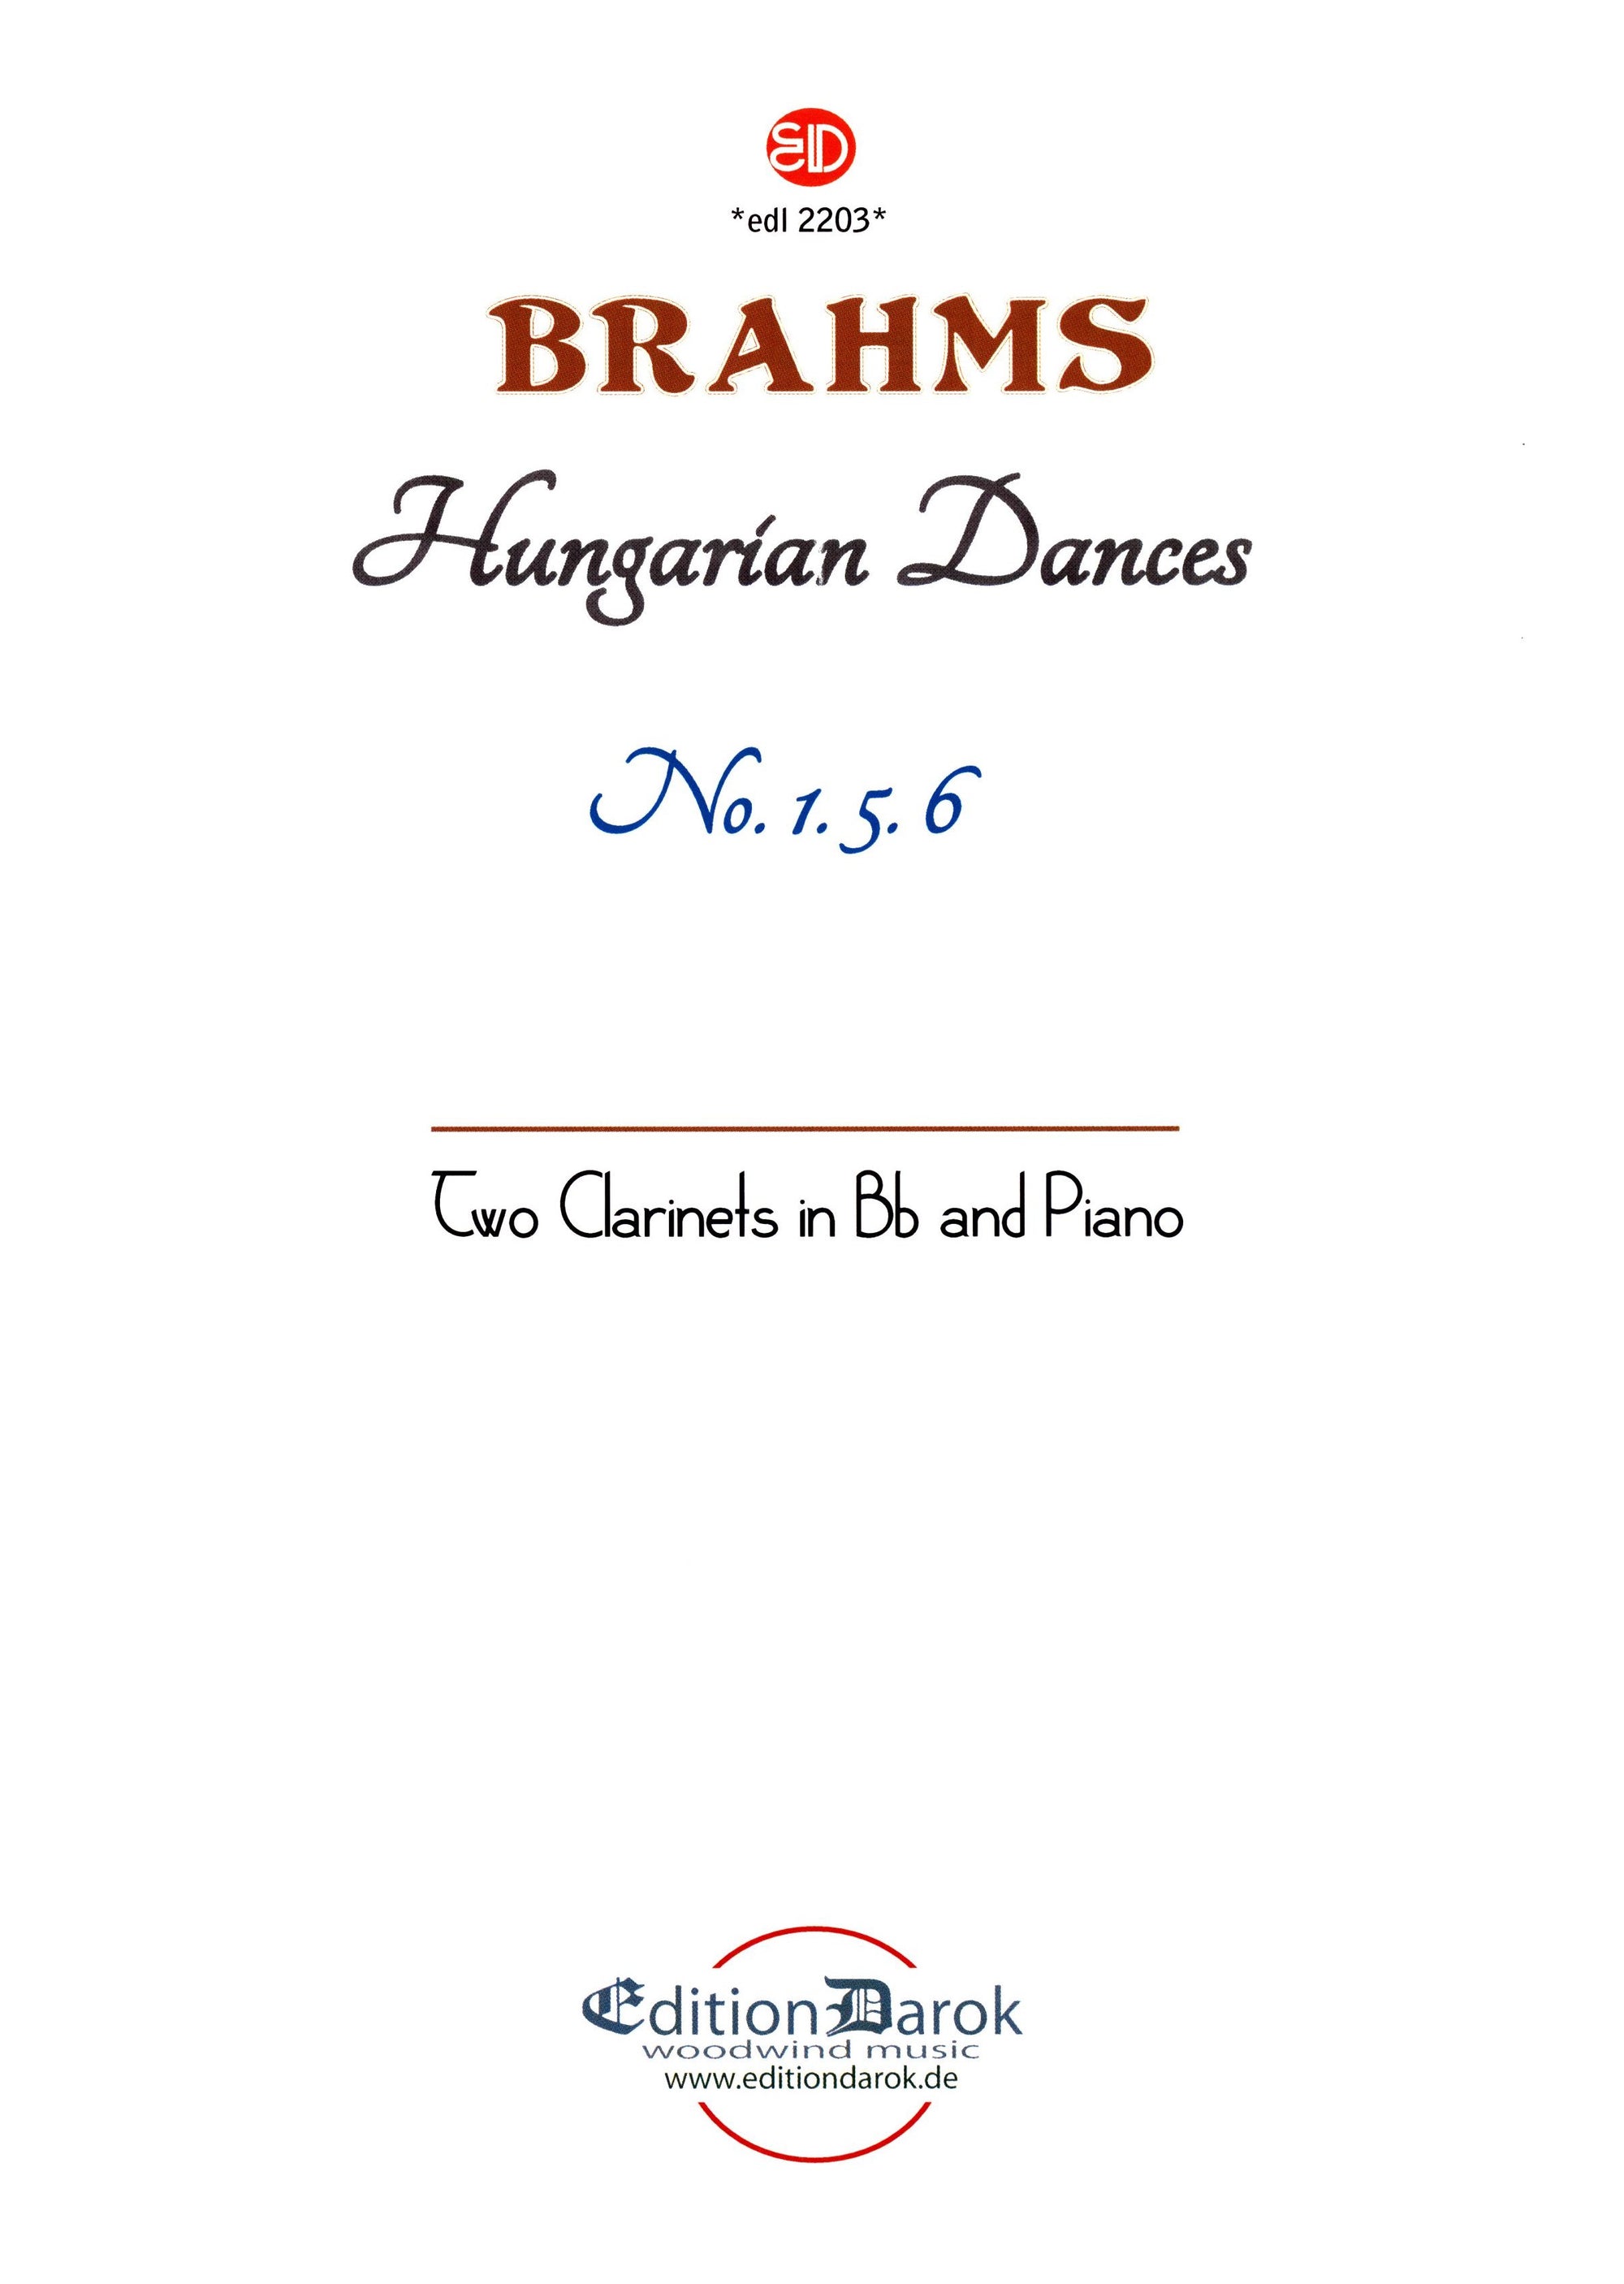 Brahms: Hungarian Dances Nos. 1, 5 & 6 (arr. for 2 clarinets and piano)